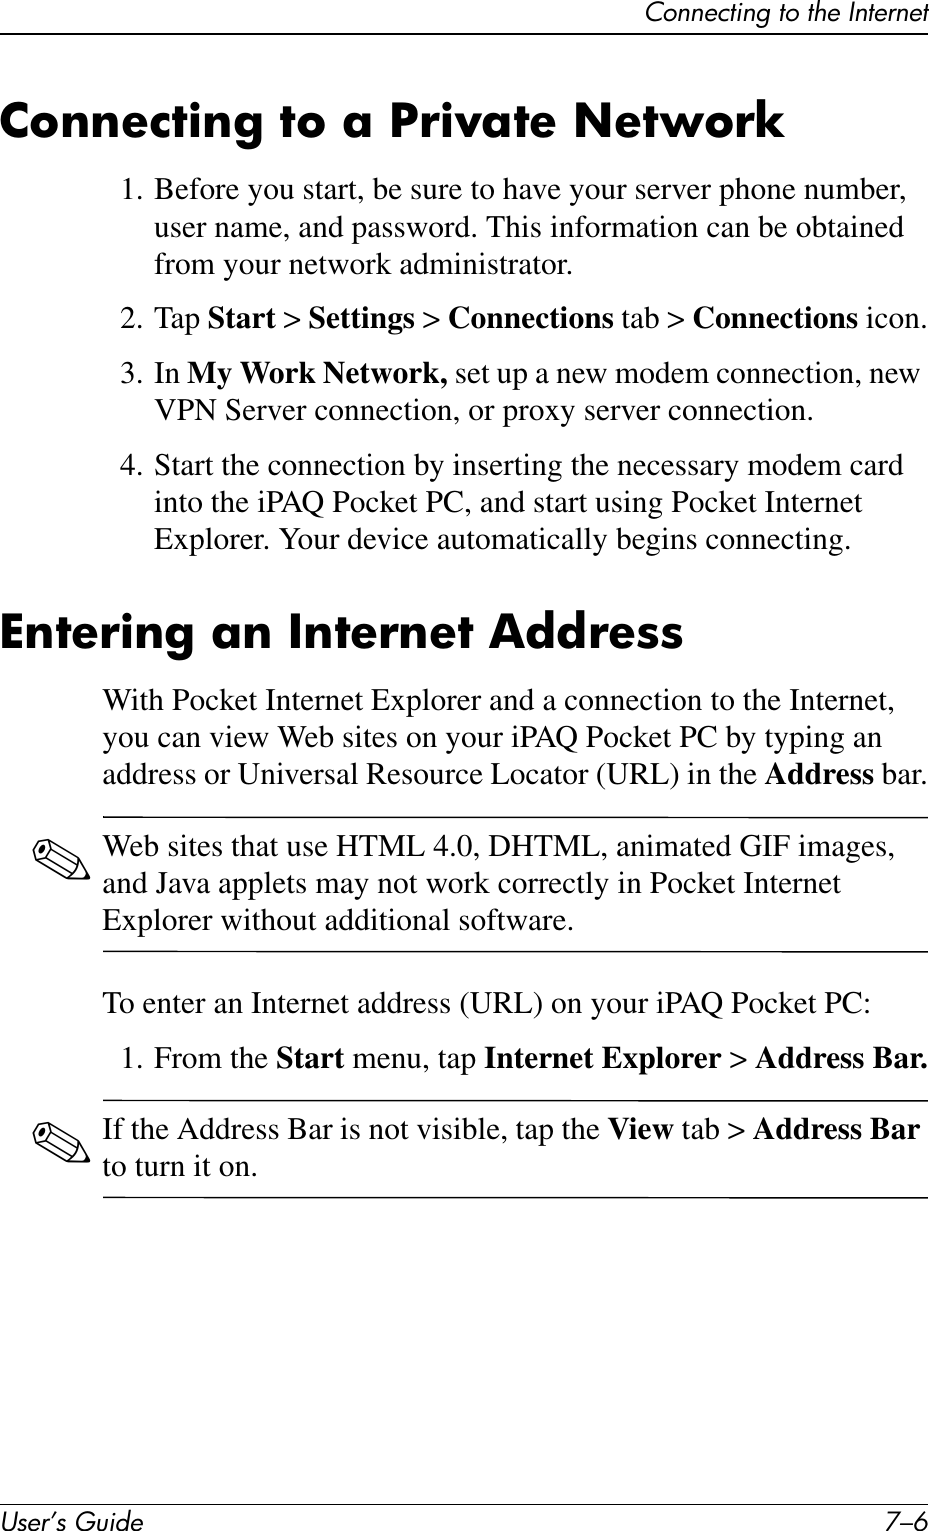 User’s Guide 7–6Connecting to the InternetConnecting to a Private Network1. Before you start, be sure to have your server phone number, user name, and password. This information can be obtained from your network administrator.2. Tap Start &gt; Settings &gt; Connections tab &gt; Connections icon.3. In My Work Network, set up a new modem connection, new VPN Server connection, or proxy server connection.4. Start the connection by inserting the necessary modem card into the iPAQ Pocket PC, and start using Pocket Internet Explorer. Your device automatically begins connecting.Entering an Internet AddressWith Pocket Internet Explorer and a connection to the Internet, you can view Web sites on your iPAQ Pocket PC by typing an address or Universal Resource Locator (URL) in the Address bar.✎Web sites that use HTML 4.0, DHTML, animated GIF images, and Java applets may not work correctly in Pocket Internet Explorer without additional software.To enter an Internet address (URL) on your iPAQ Pocket PC:1. From the Start menu, tap Internet Explorer &gt; Address Bar.✎If the Address Bar is not visible, tap the View tab &gt; Address Bar to turn it on.